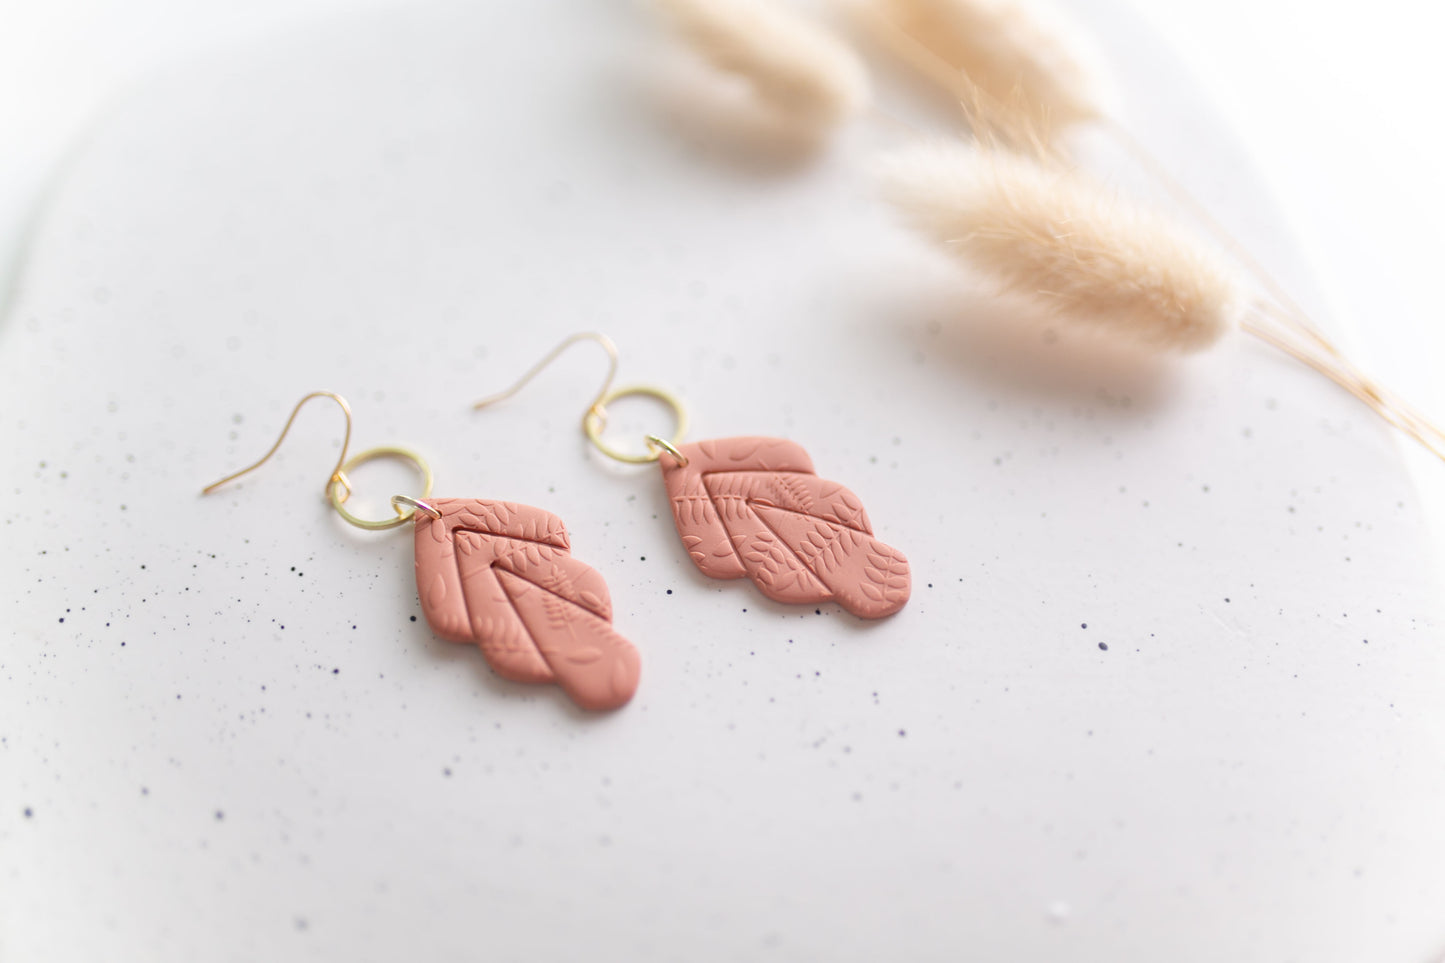 Clay earring | Floral Leaf Dangles | Fall Collection